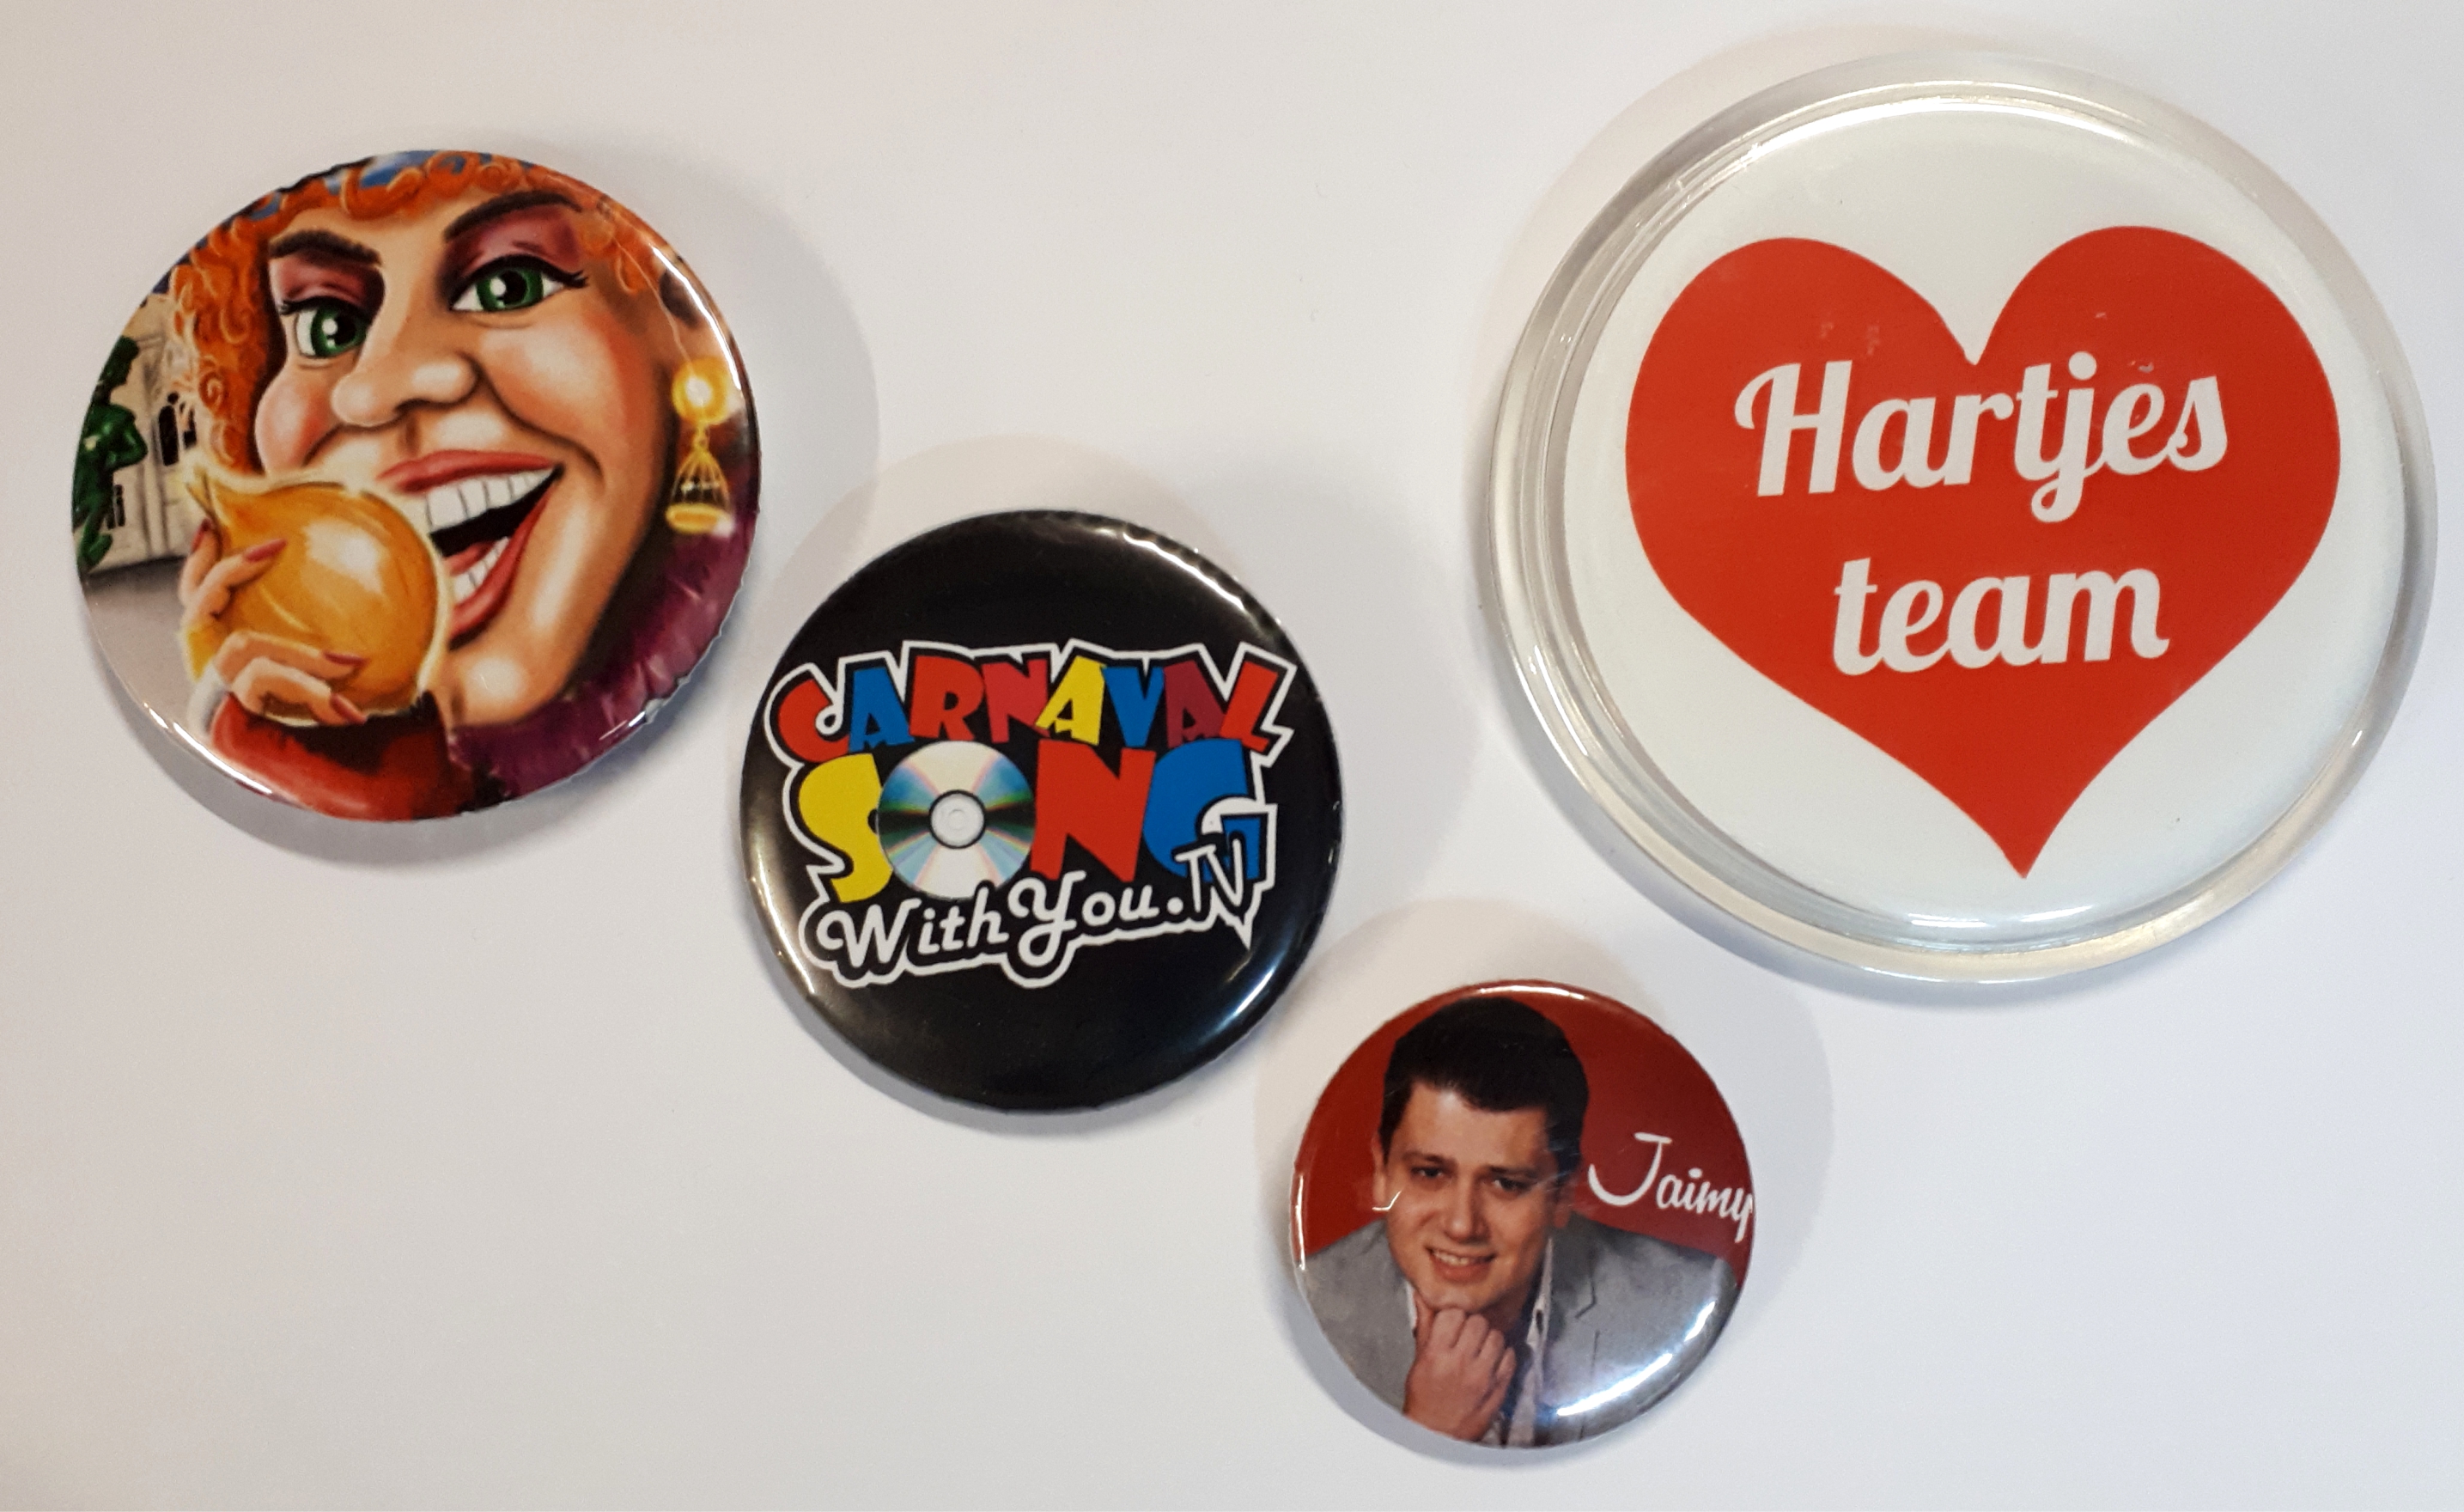 buttons alle